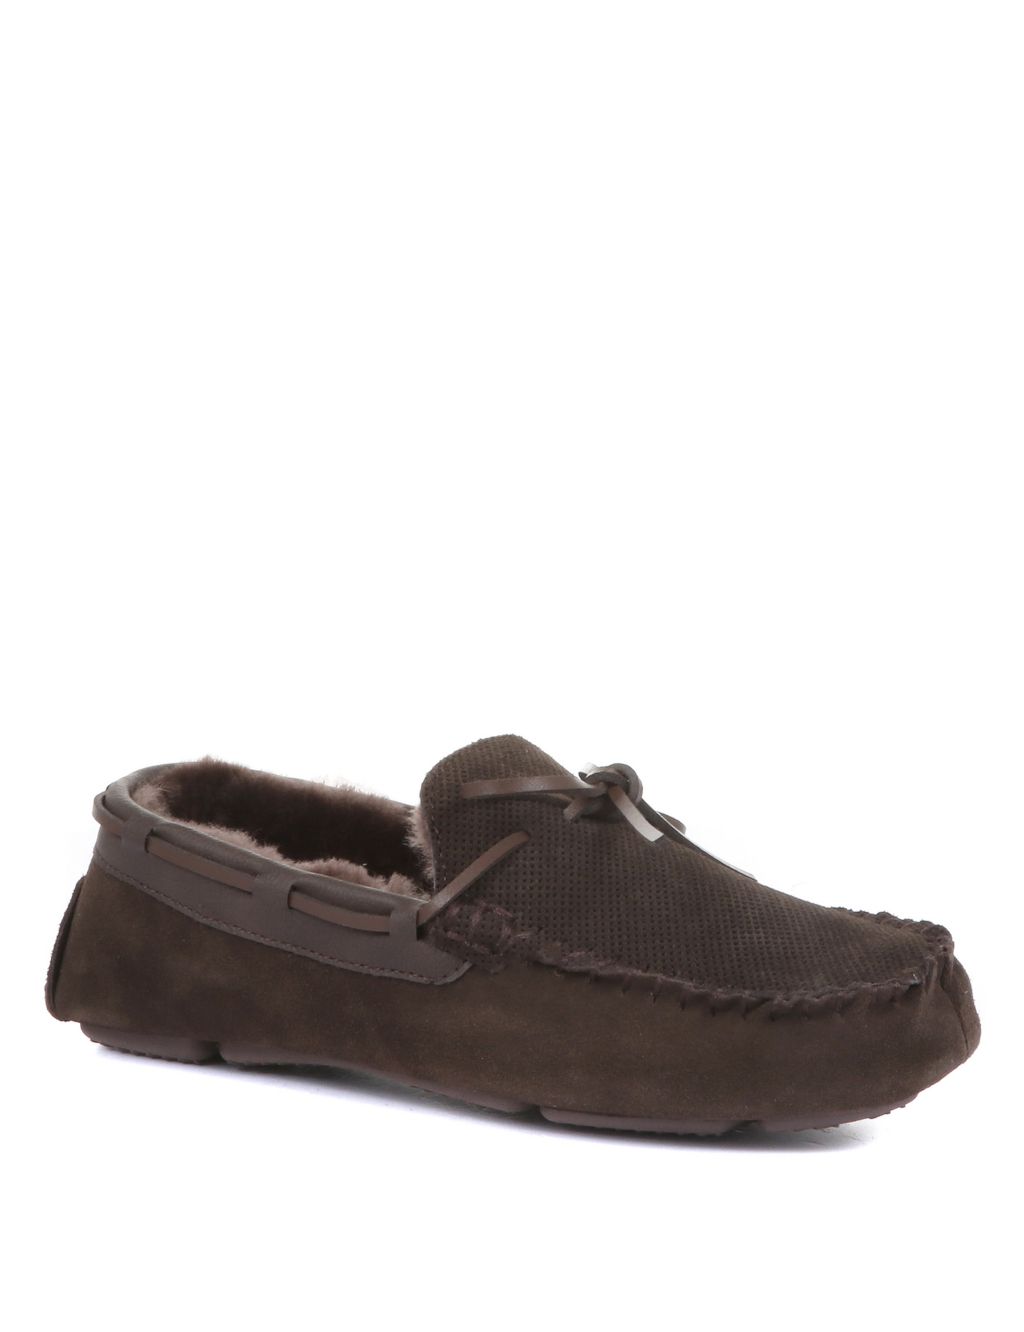 Suede Moccasin Slippers 1 of 6